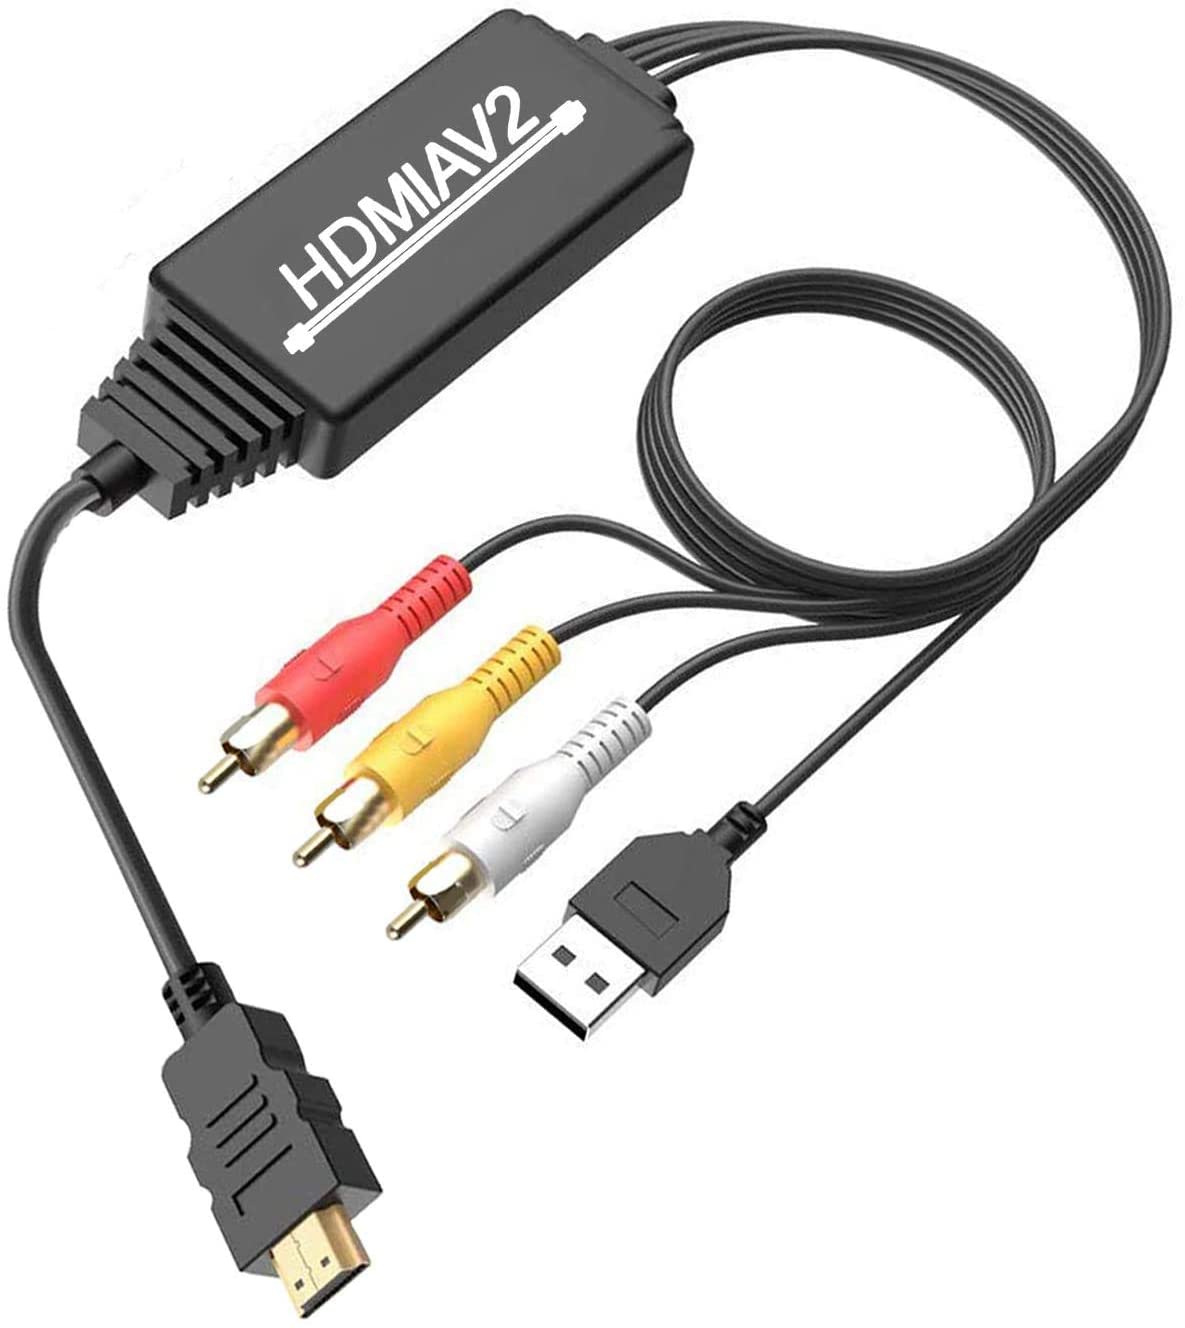 omvatten roltrap elektrode DIGITNOW! HDMI to RCA Converter, HDMI to RCA Cable Adapter, 1080P HDMI